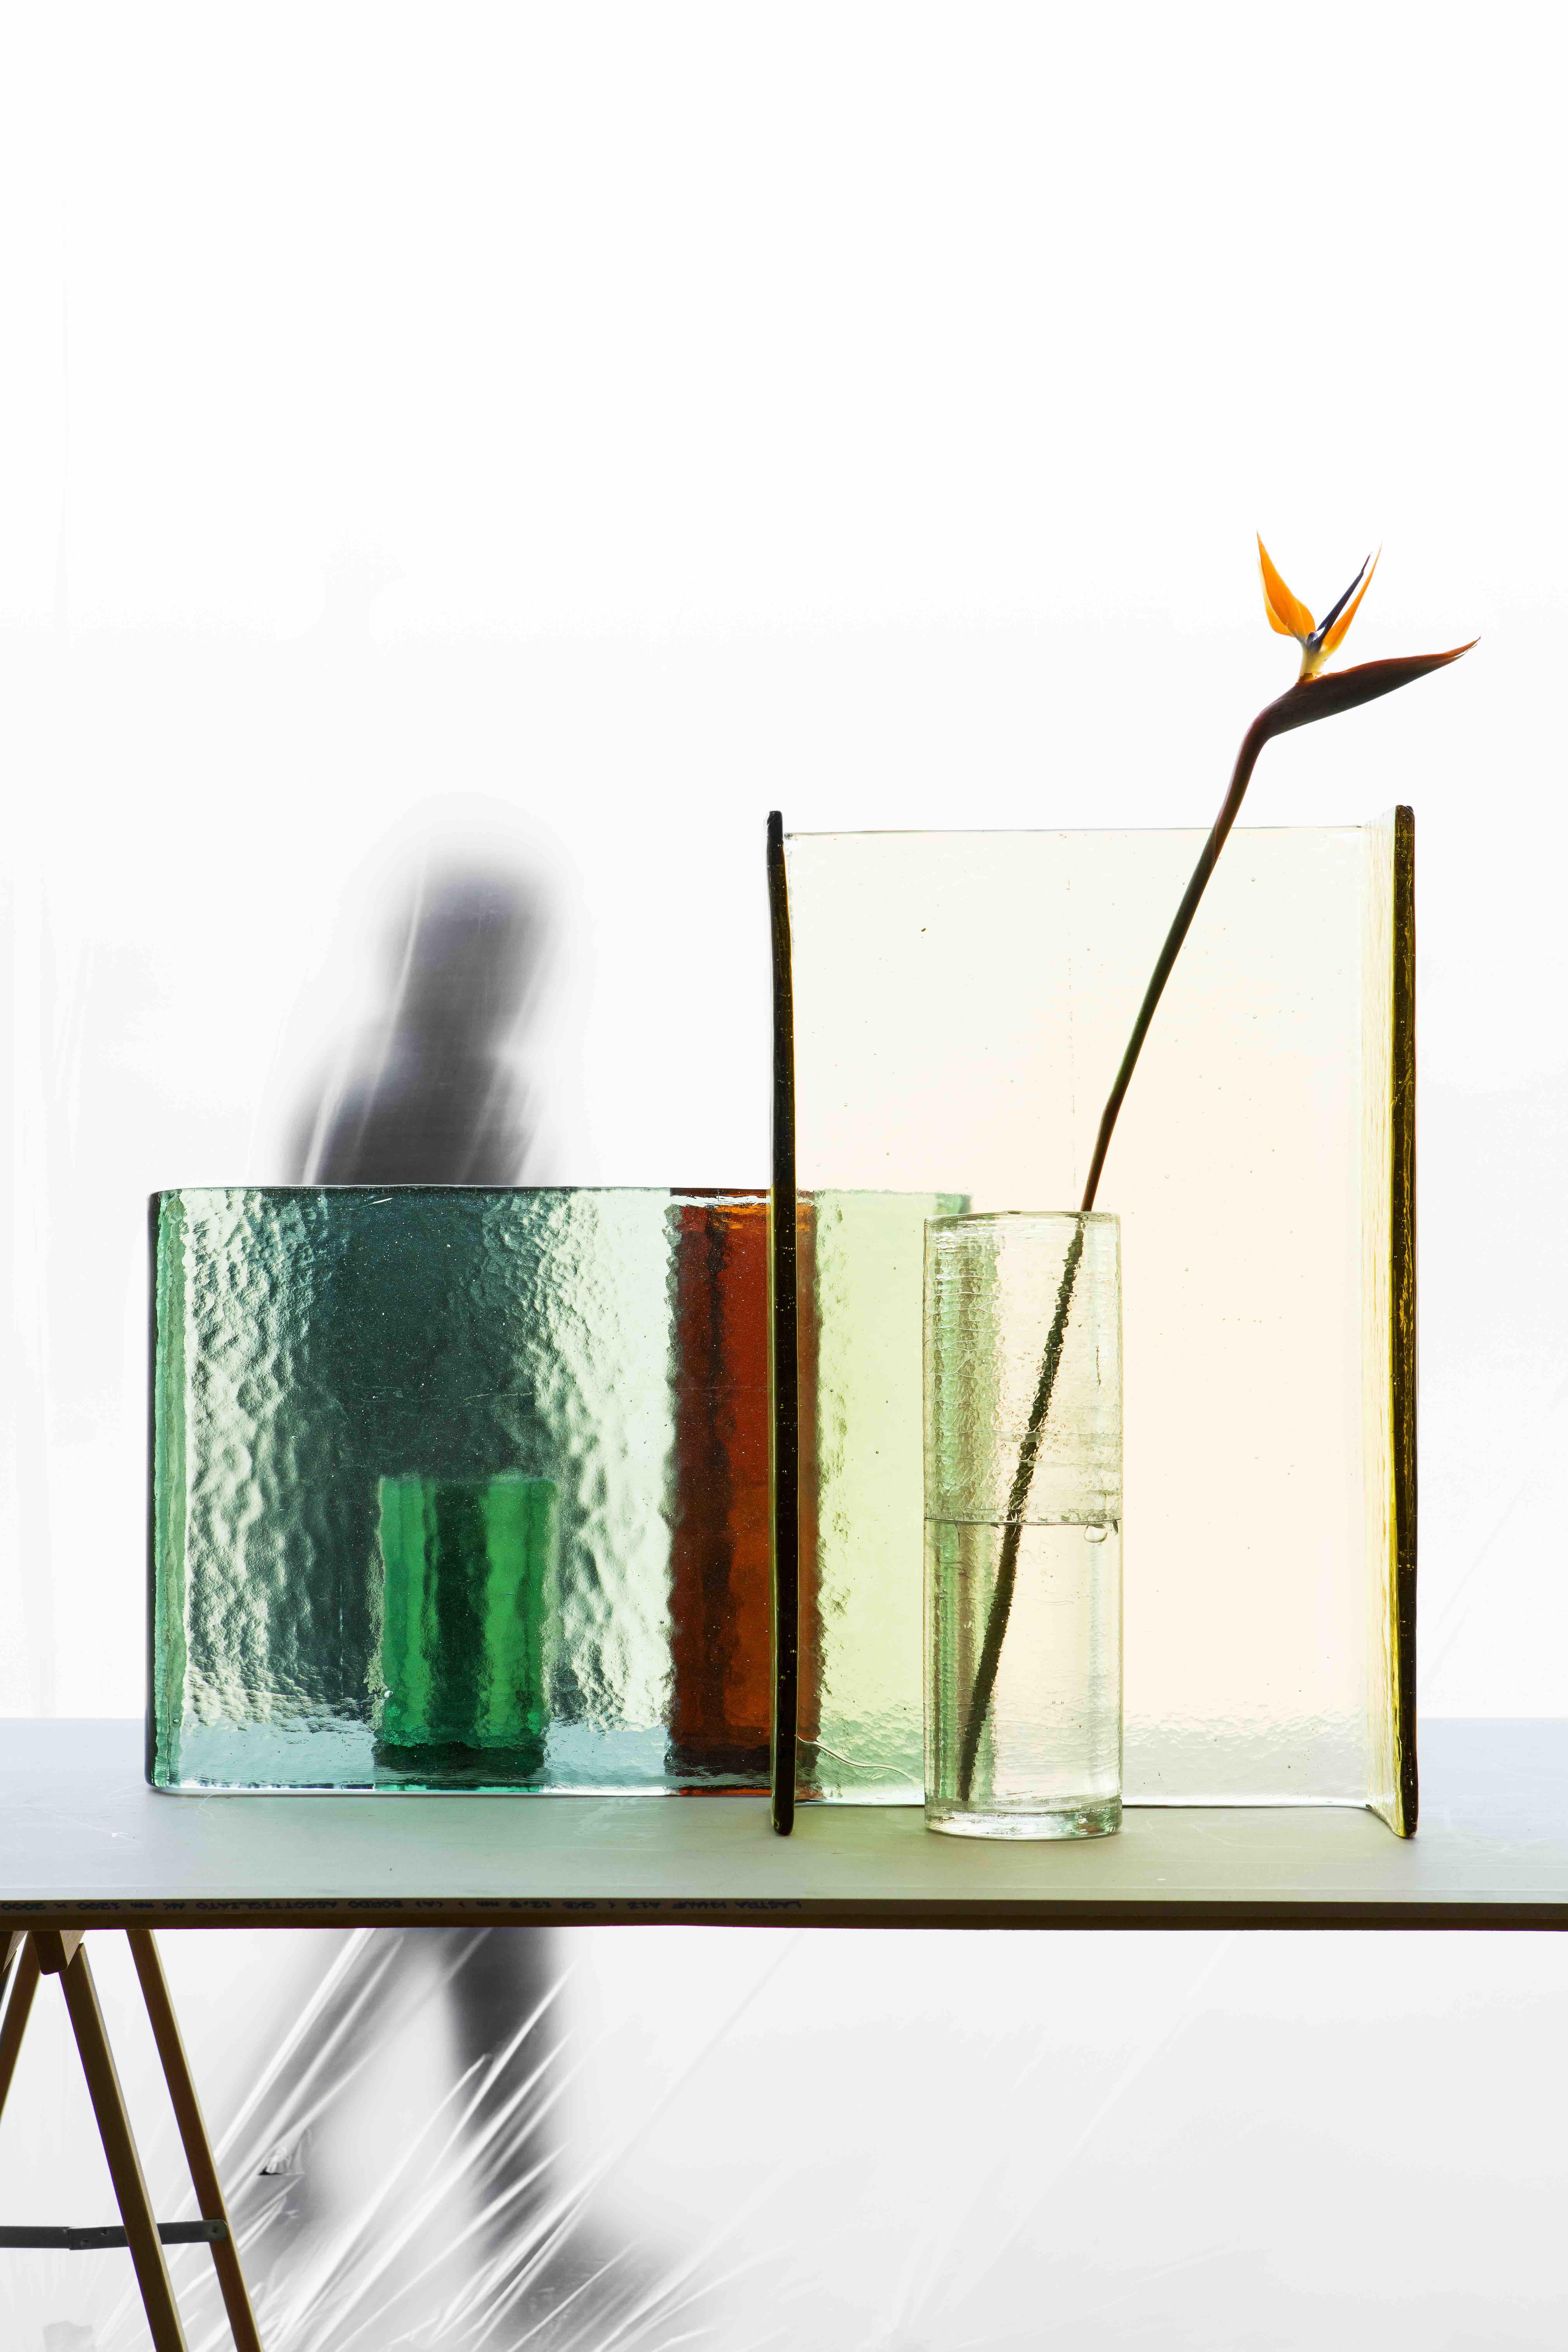 Alcova set 01
1 x Dritto Short Amber
1 x Vaso L Amber
1 x Cilindro S Crystal

Alcova is a collection of handcrafted, geometric objects that when grouped create intimate landscapes. Ronan and Erwan Bouroullec describe the collection as follows: